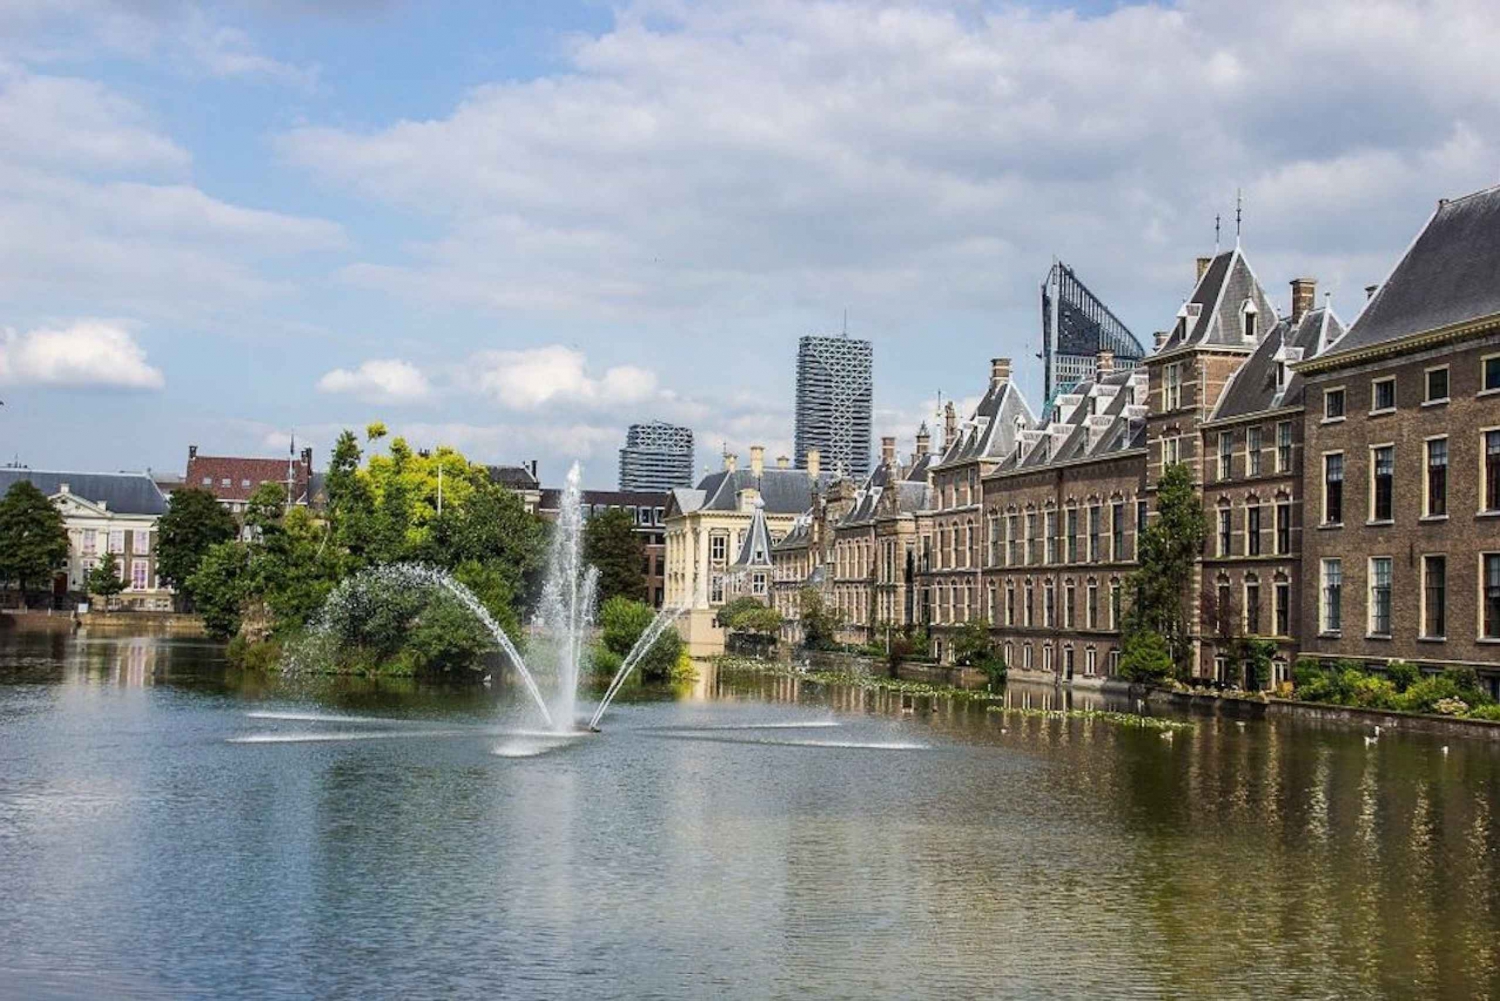 From Amsterdam: The Hague and Delft Sightseeing Tour